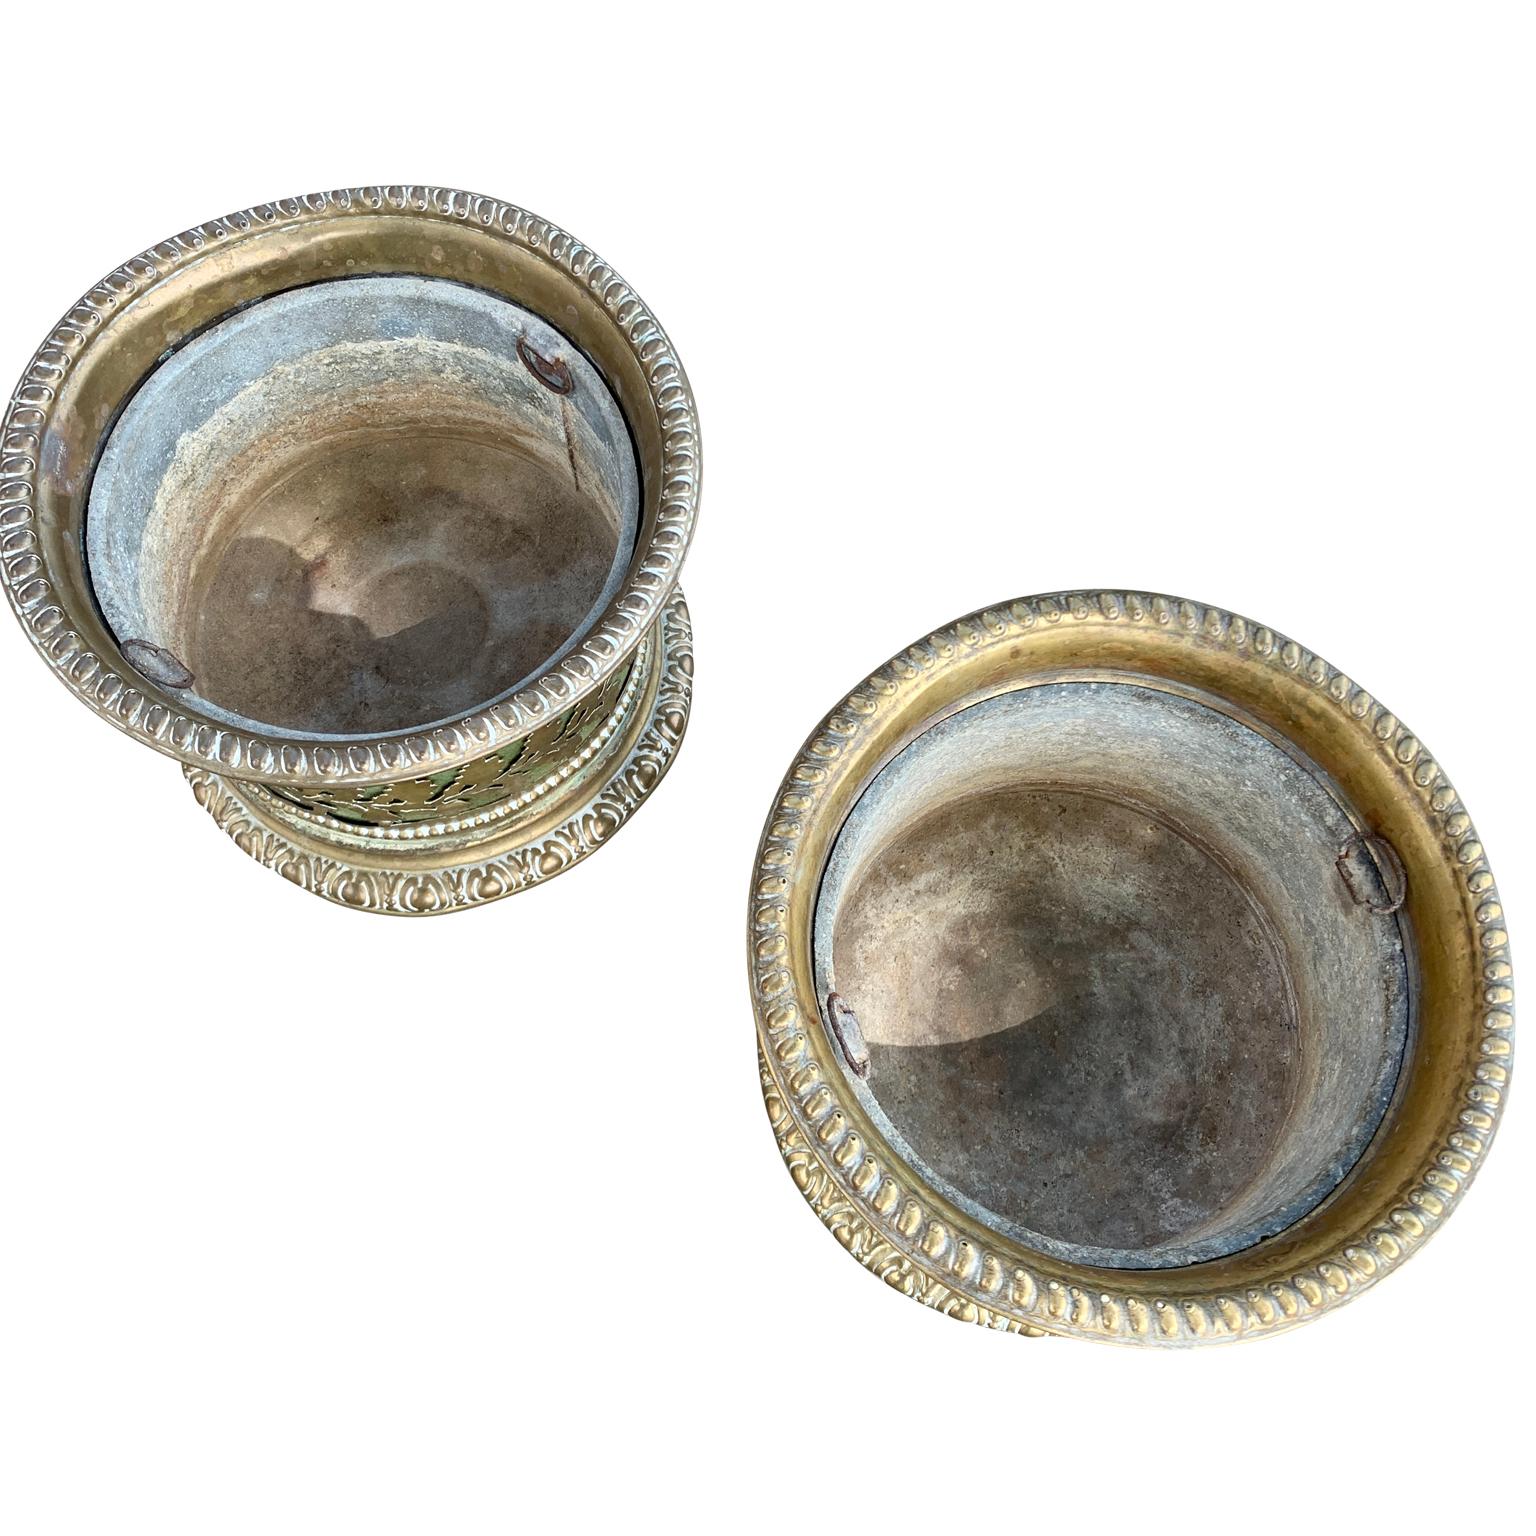 A pair of French brass antique bottle holder coasters from the first part of the 19th Century. With their pierced design around the circumference and the shape of leaves, they are ideal in form as well as functional in size (diameter 6,3 inches - 16